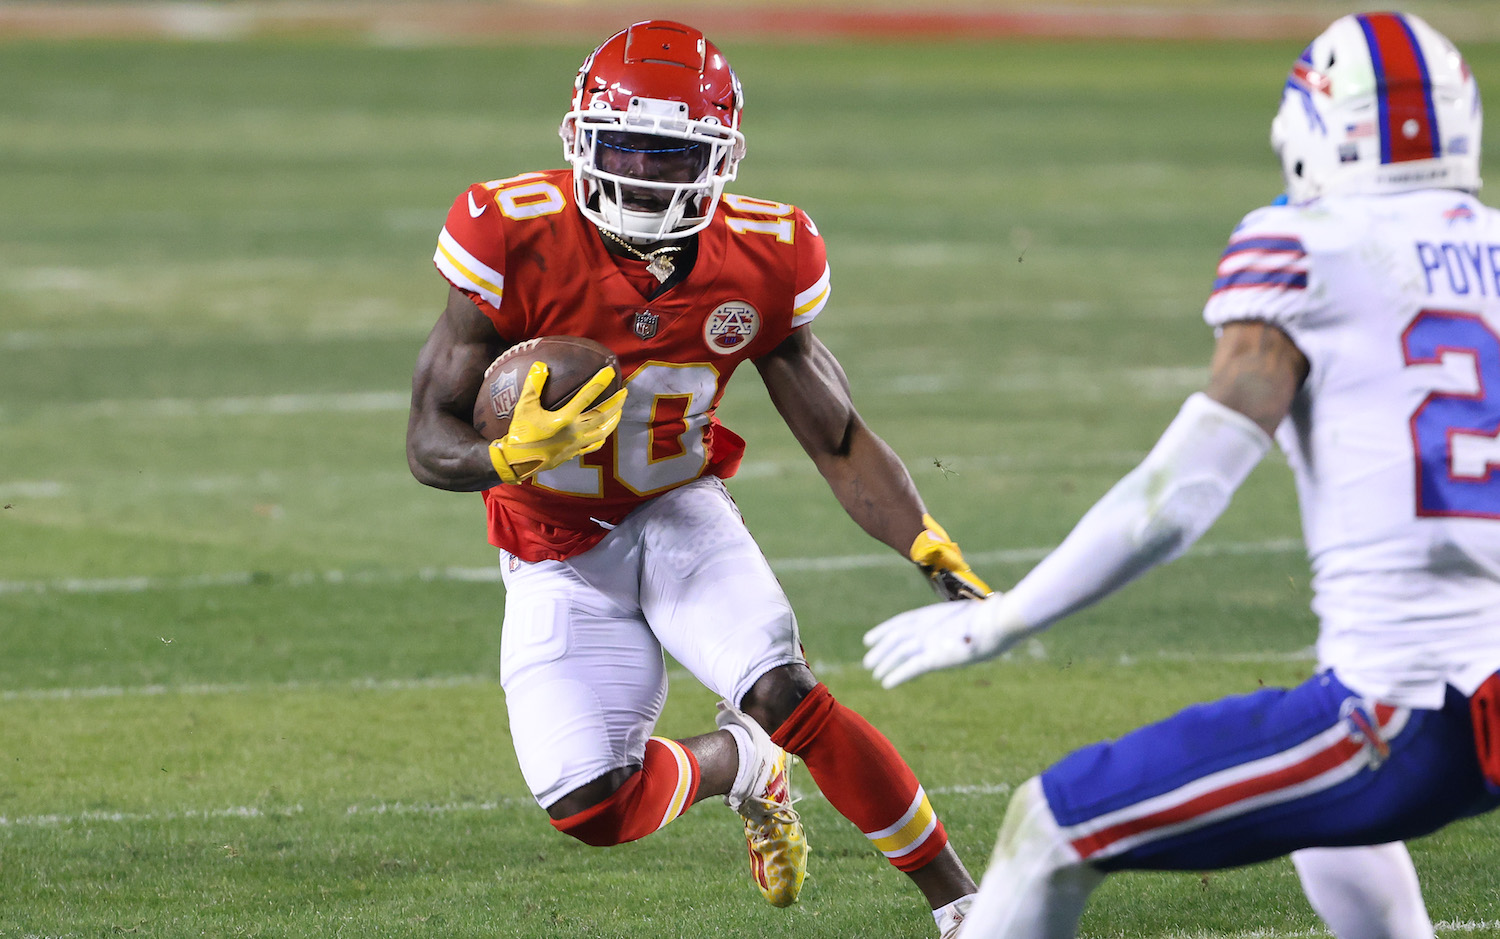 KANSAS CITY, MISSOURI - JANUARY 24: Tyreek Hill #10 of the Kansas City Chiefs runs with the ball in the second half against the Buffalo Bills during the AFC Championship game at Arrowhead Stadium on January 24, 2021 in Kansas City, Missouri. (Photo by Jamie Squire/Getty Images)